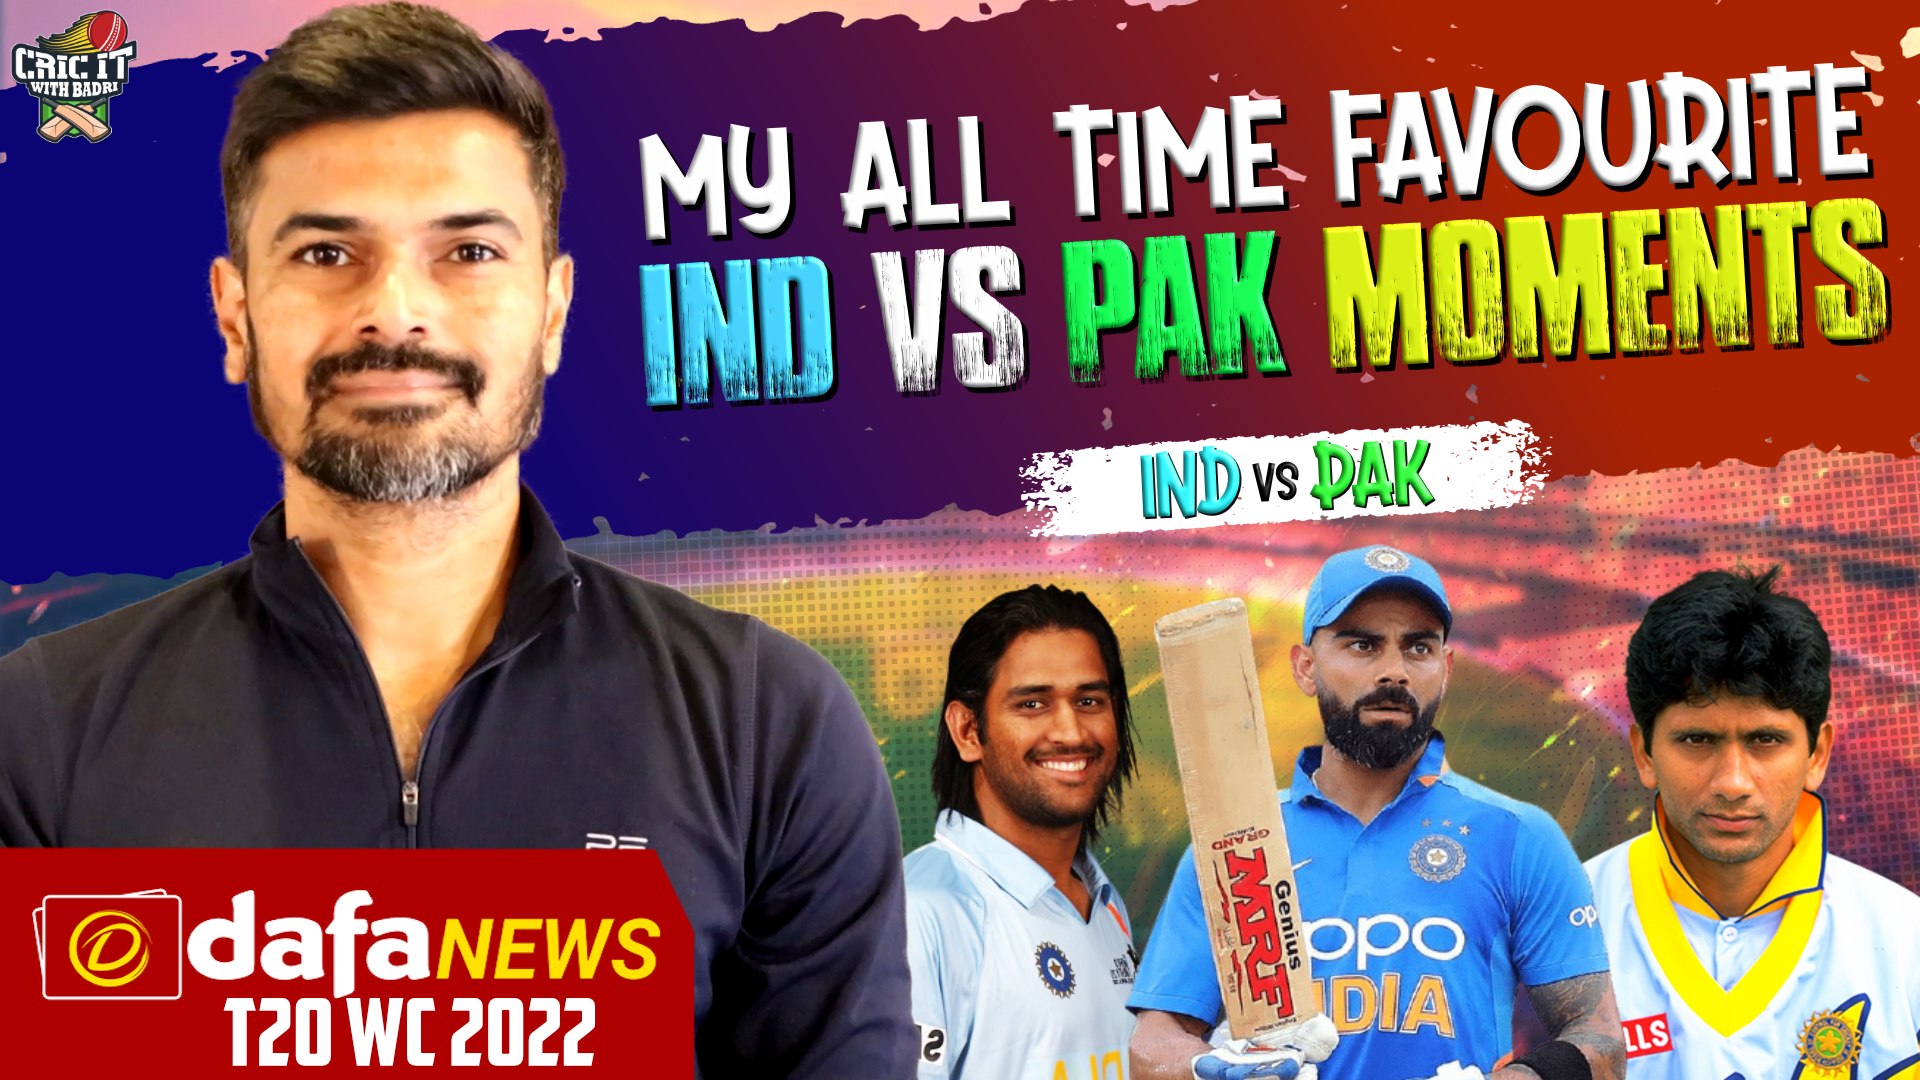 IND VS PAK My all time Fav Moments | Cric It with Badri